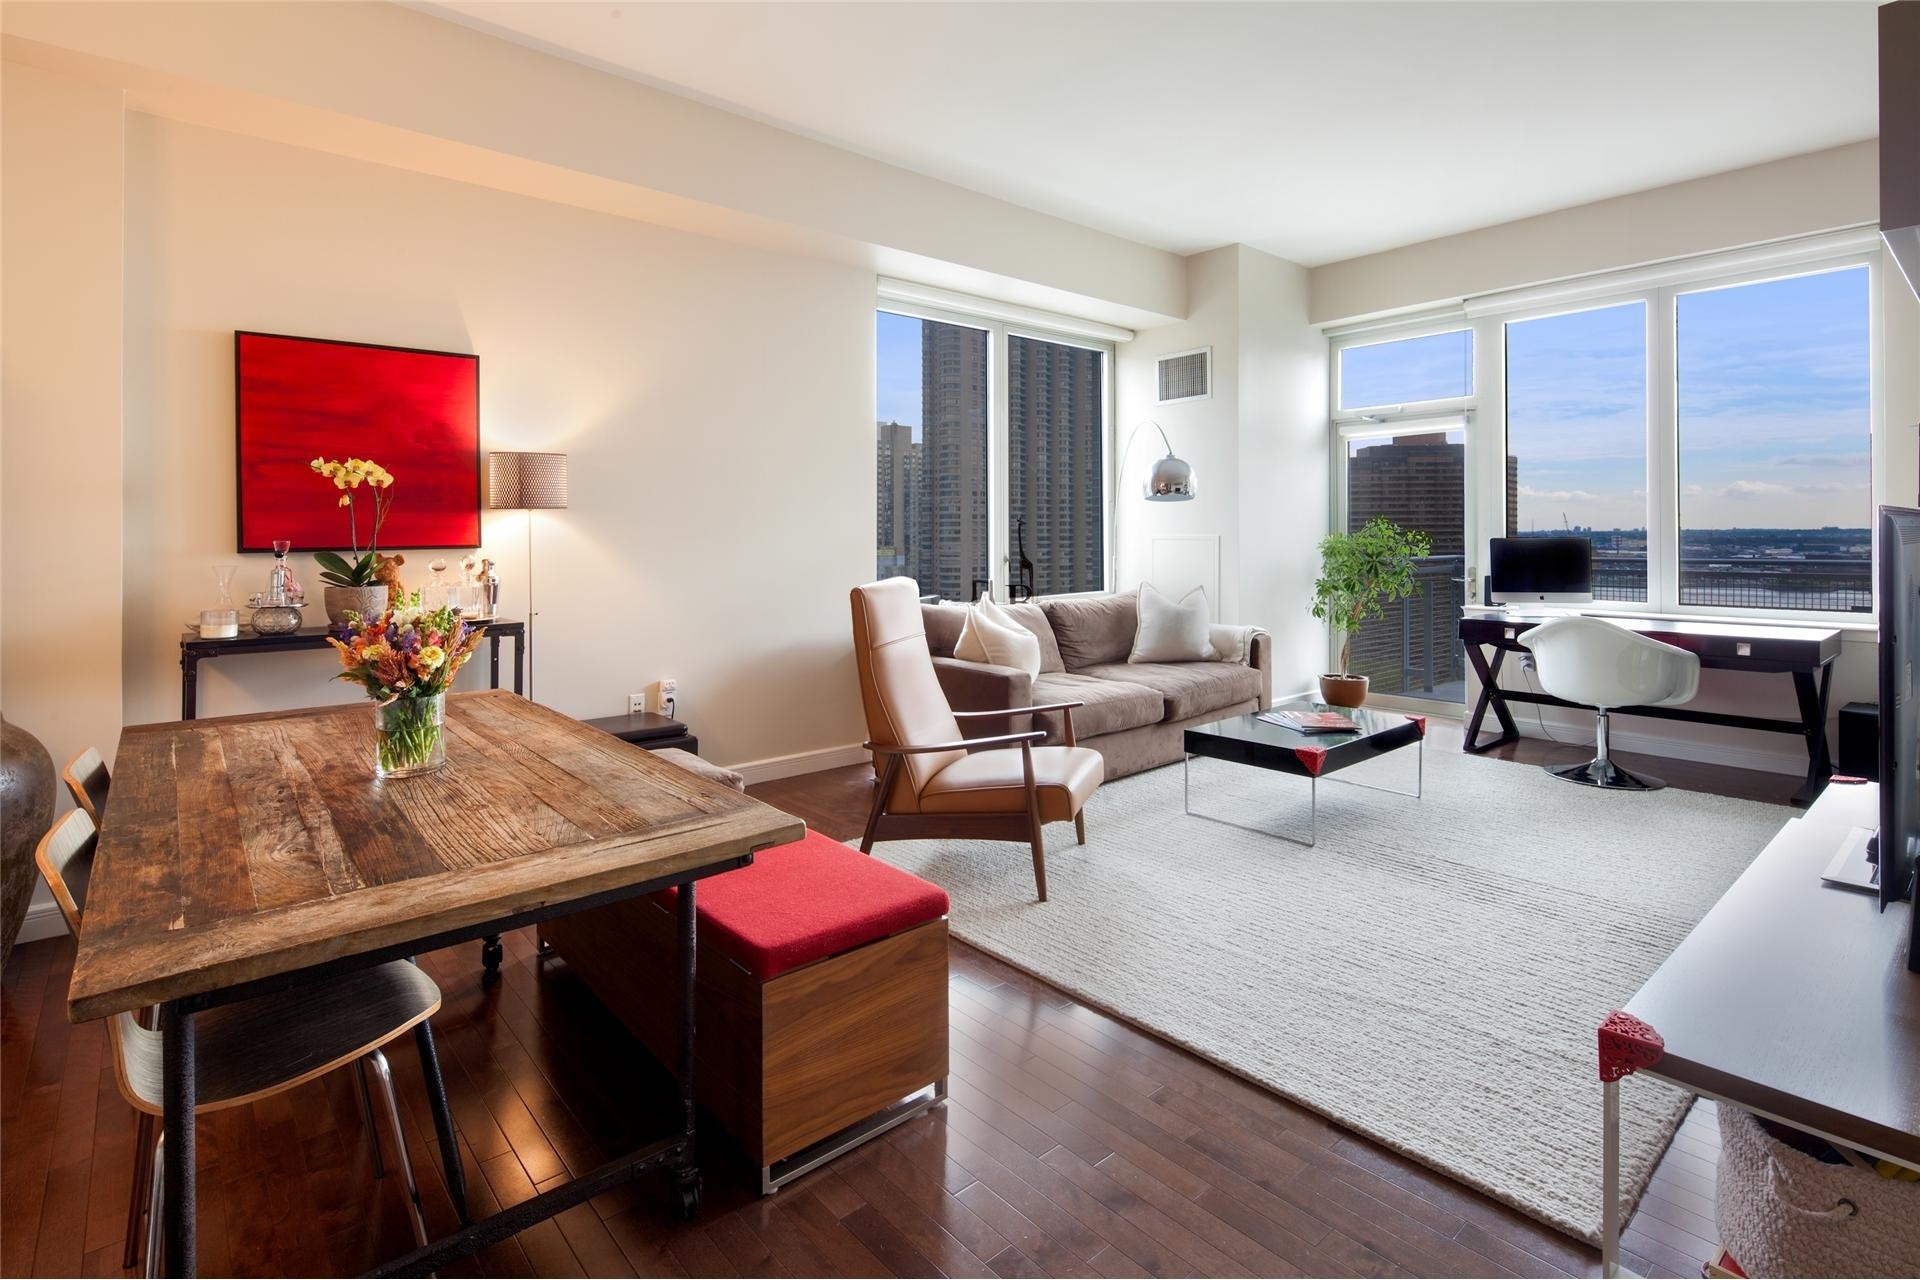 Property at The Charleston, 225 East 34th St, PHB New York